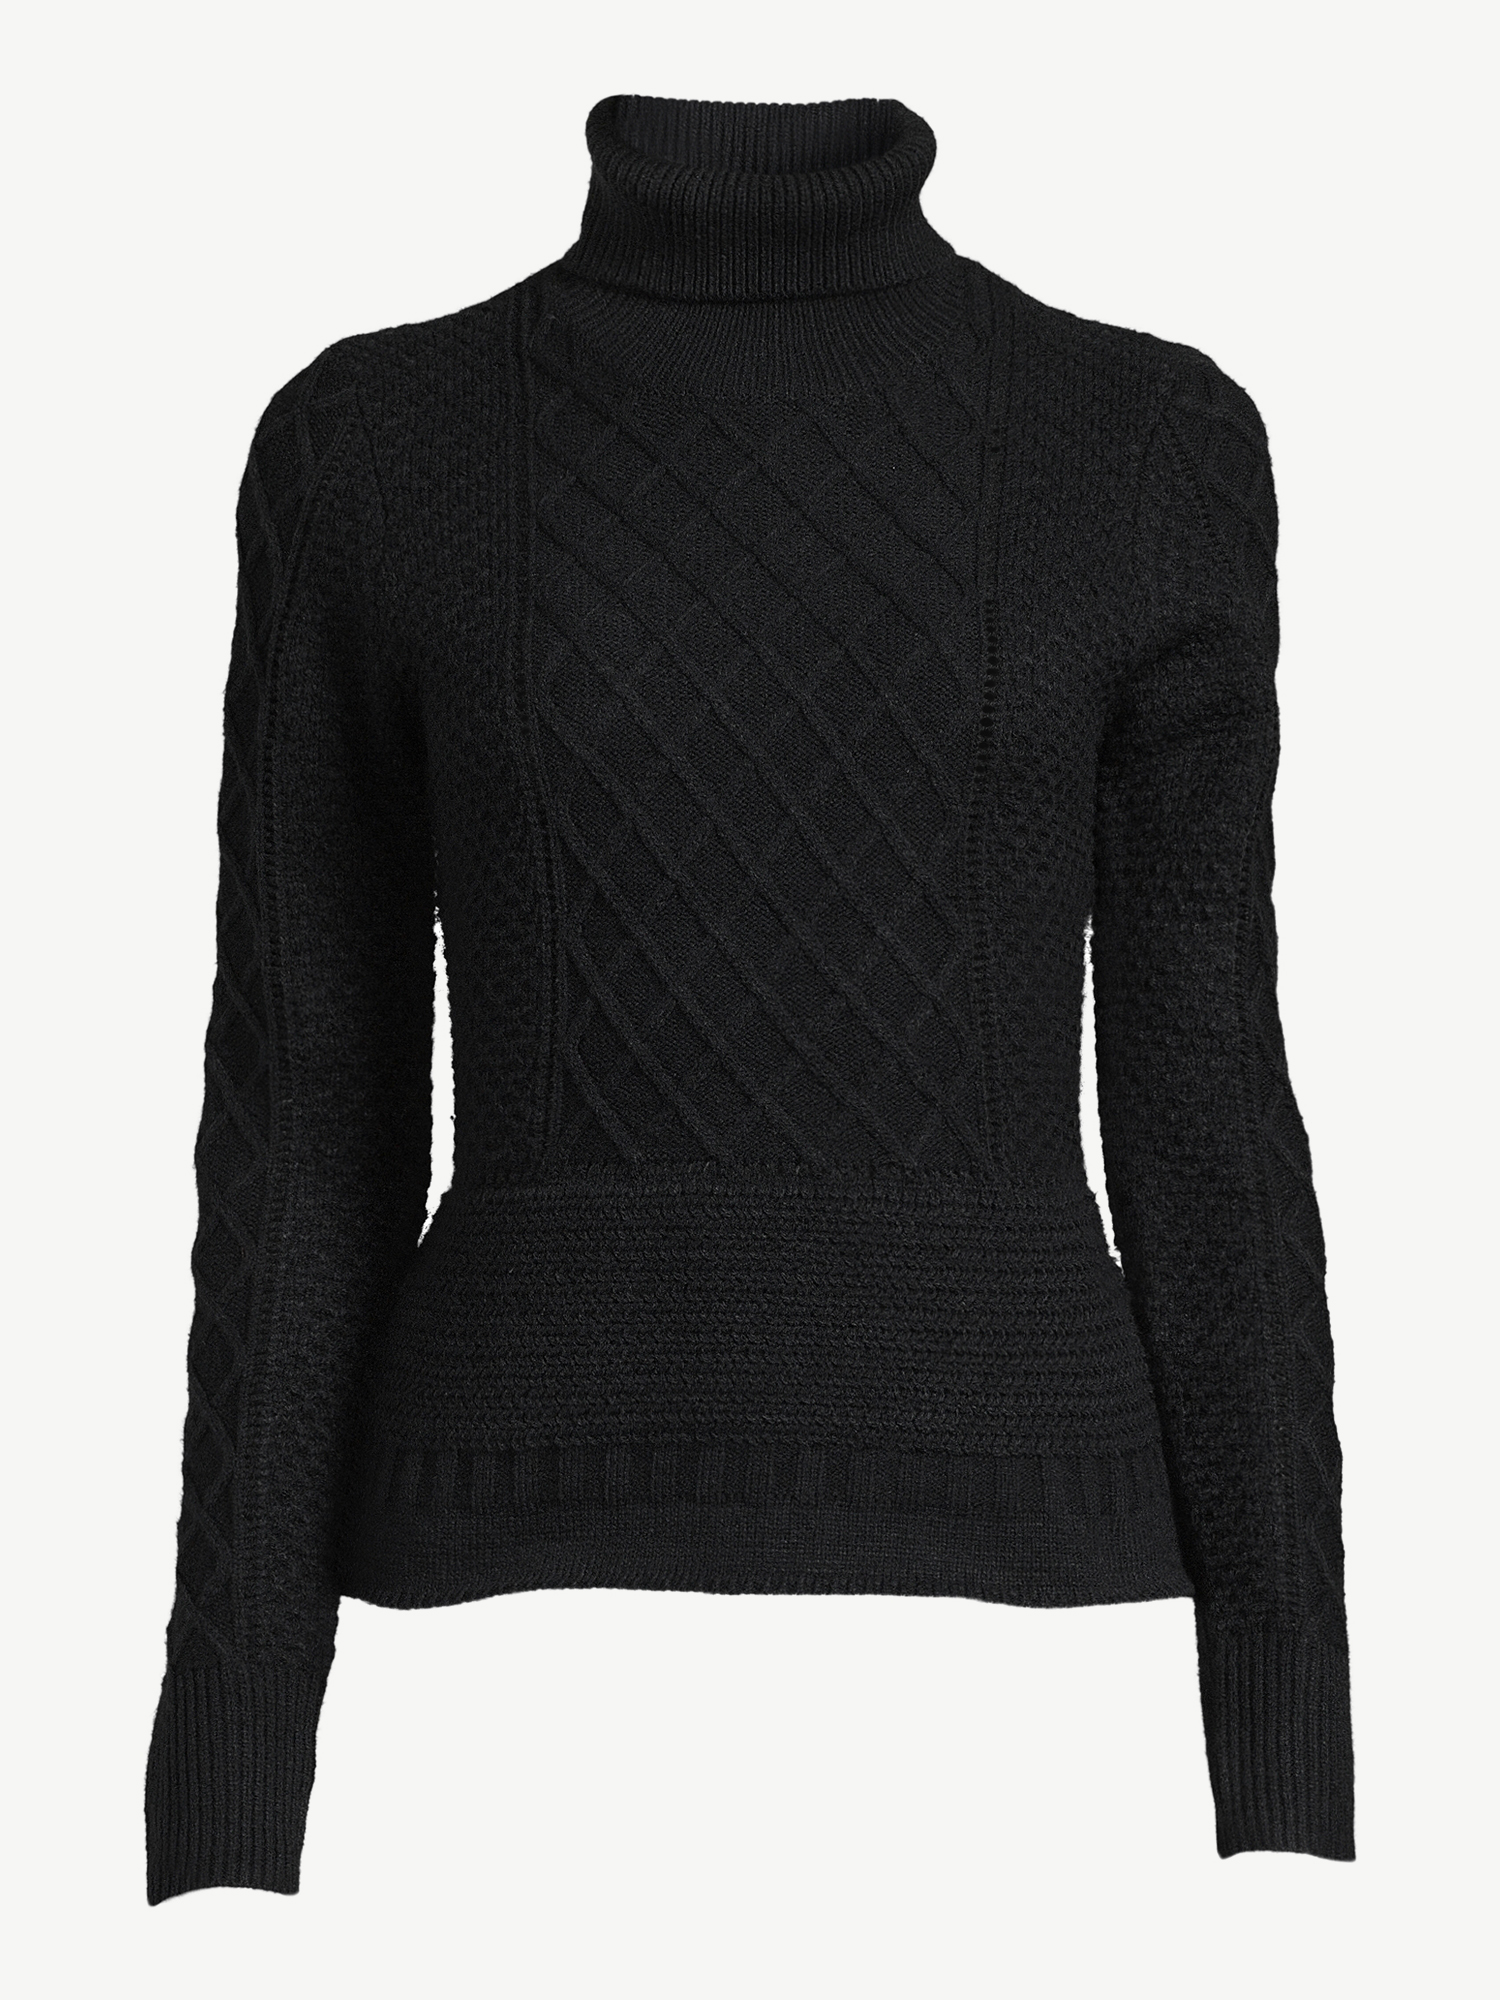 Scoop Women's Cable Knit Pullover Sweater with Long Sleeves, Sizes XS-XXL - image 3 of 5